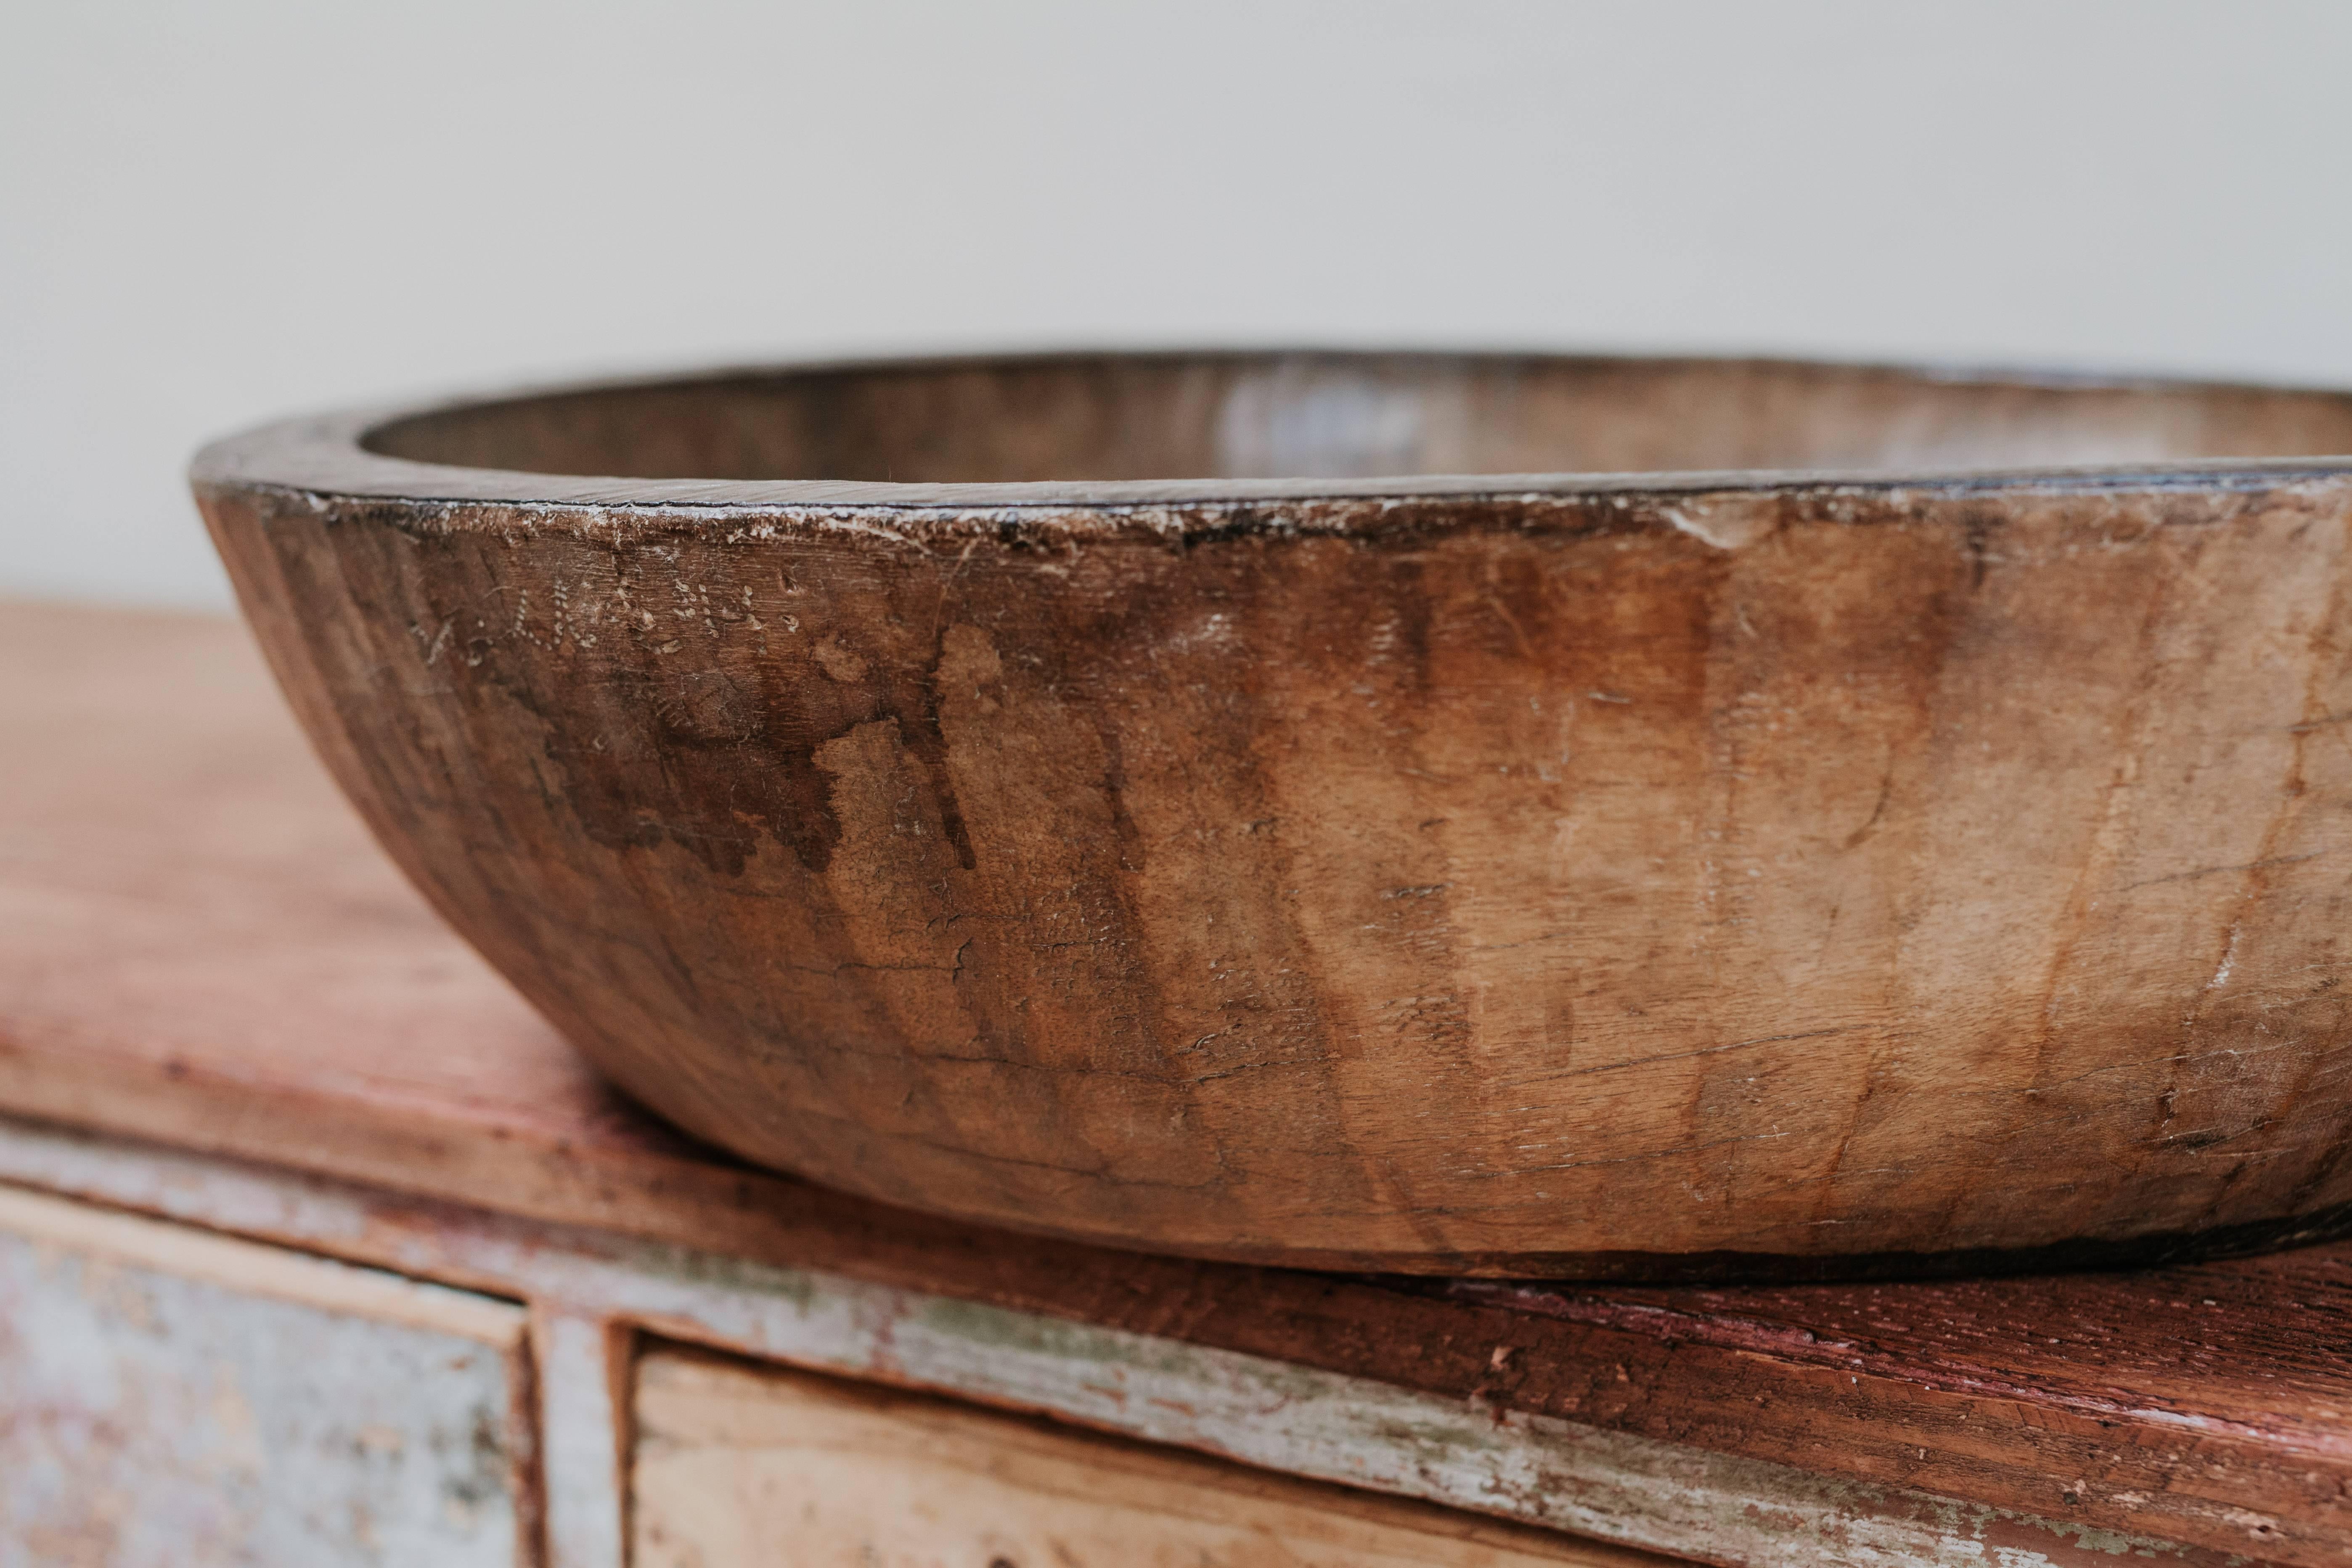 This extra large wooden bowl is carved from a single piece of wood, with original hand-wrought iron rim, an out of the ordinary object.